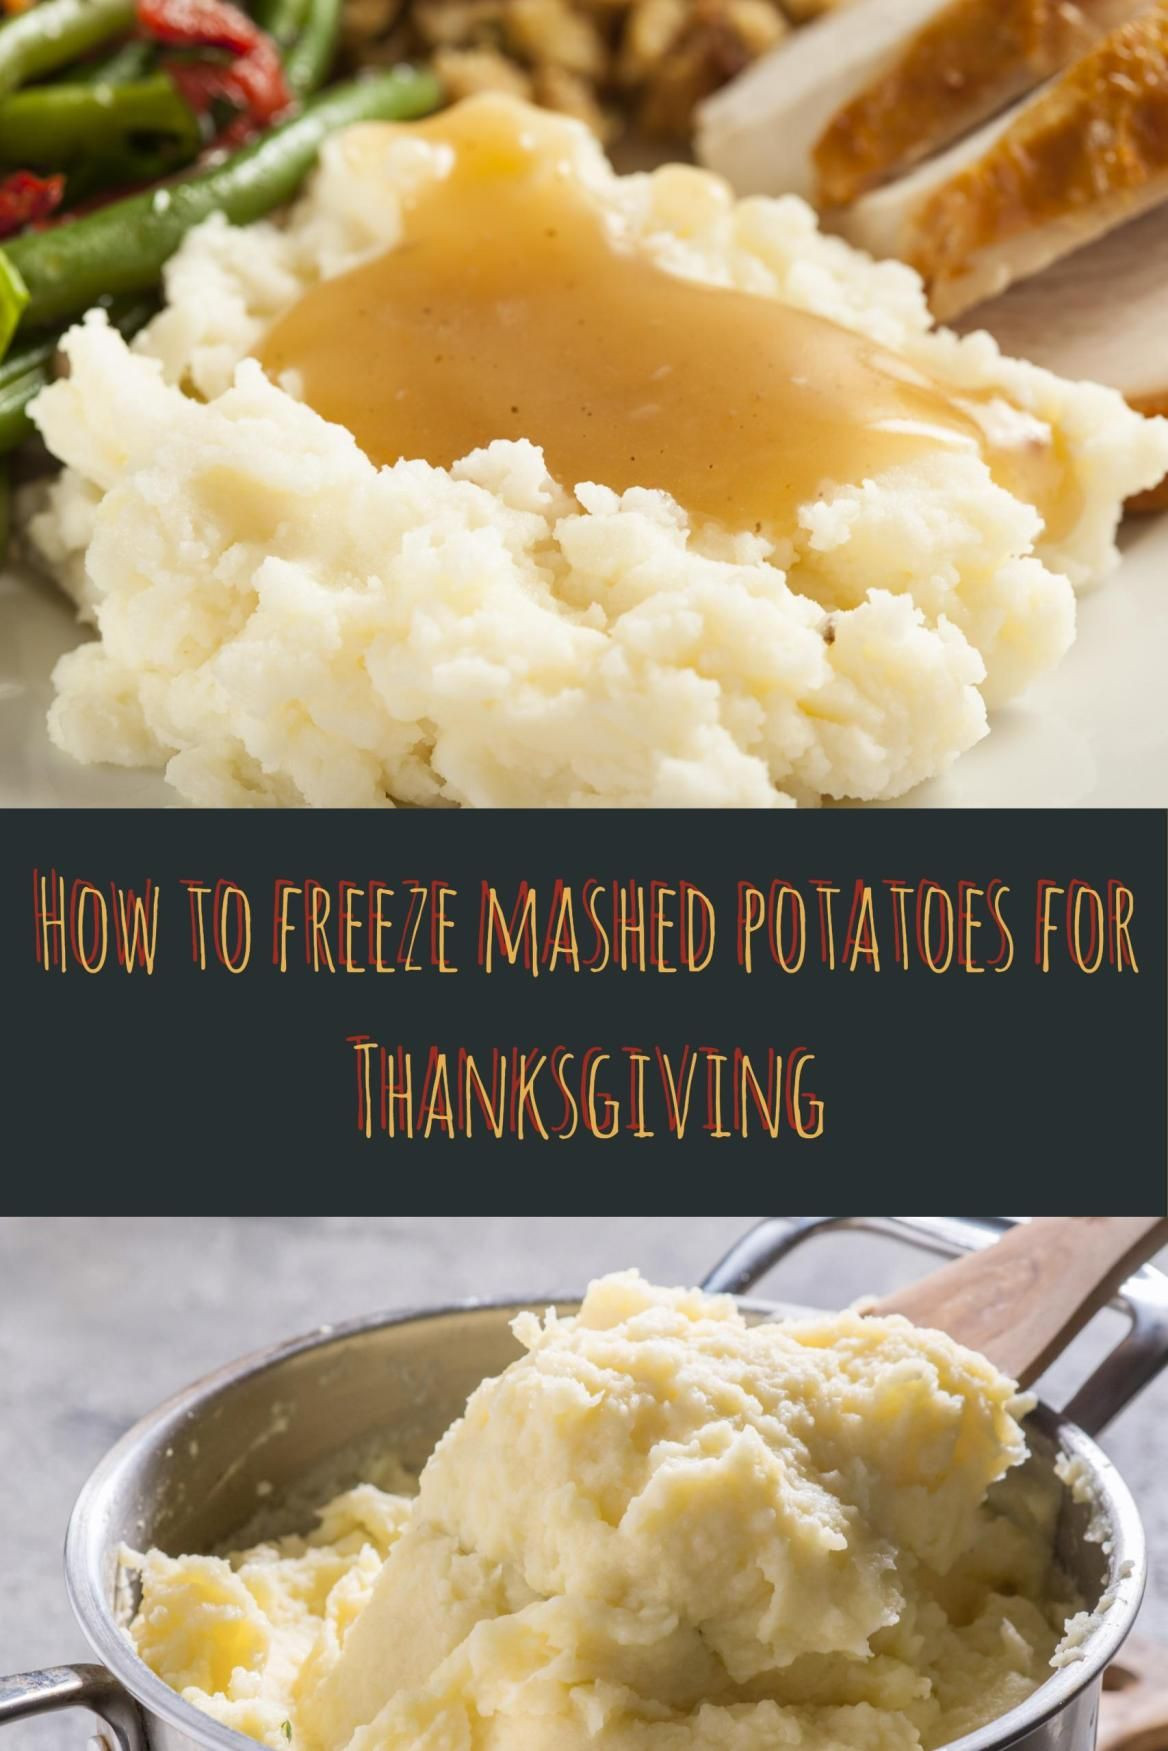 Make Ahead Mashed Potatoes Freeze
 How To Freeze Mashed Potatoes Now For Thanksgiving